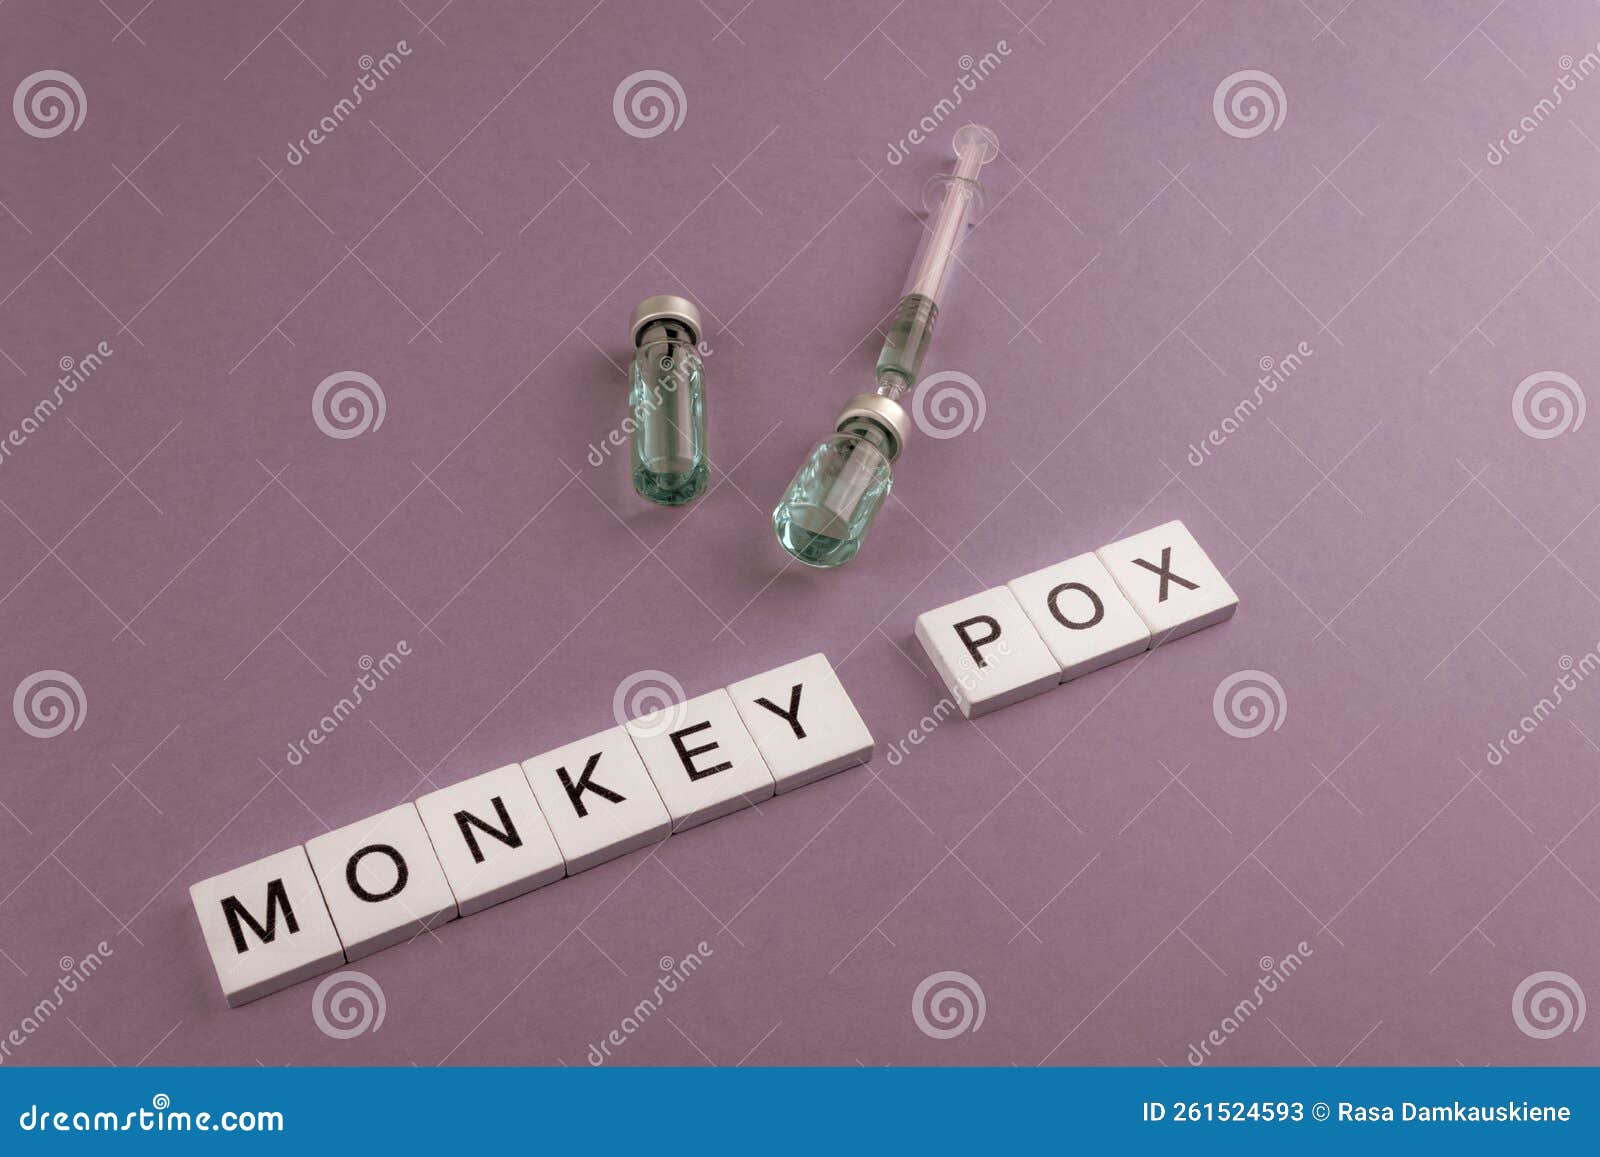 monkey pox. words written on square wooden tiles with vaccine on pink background.